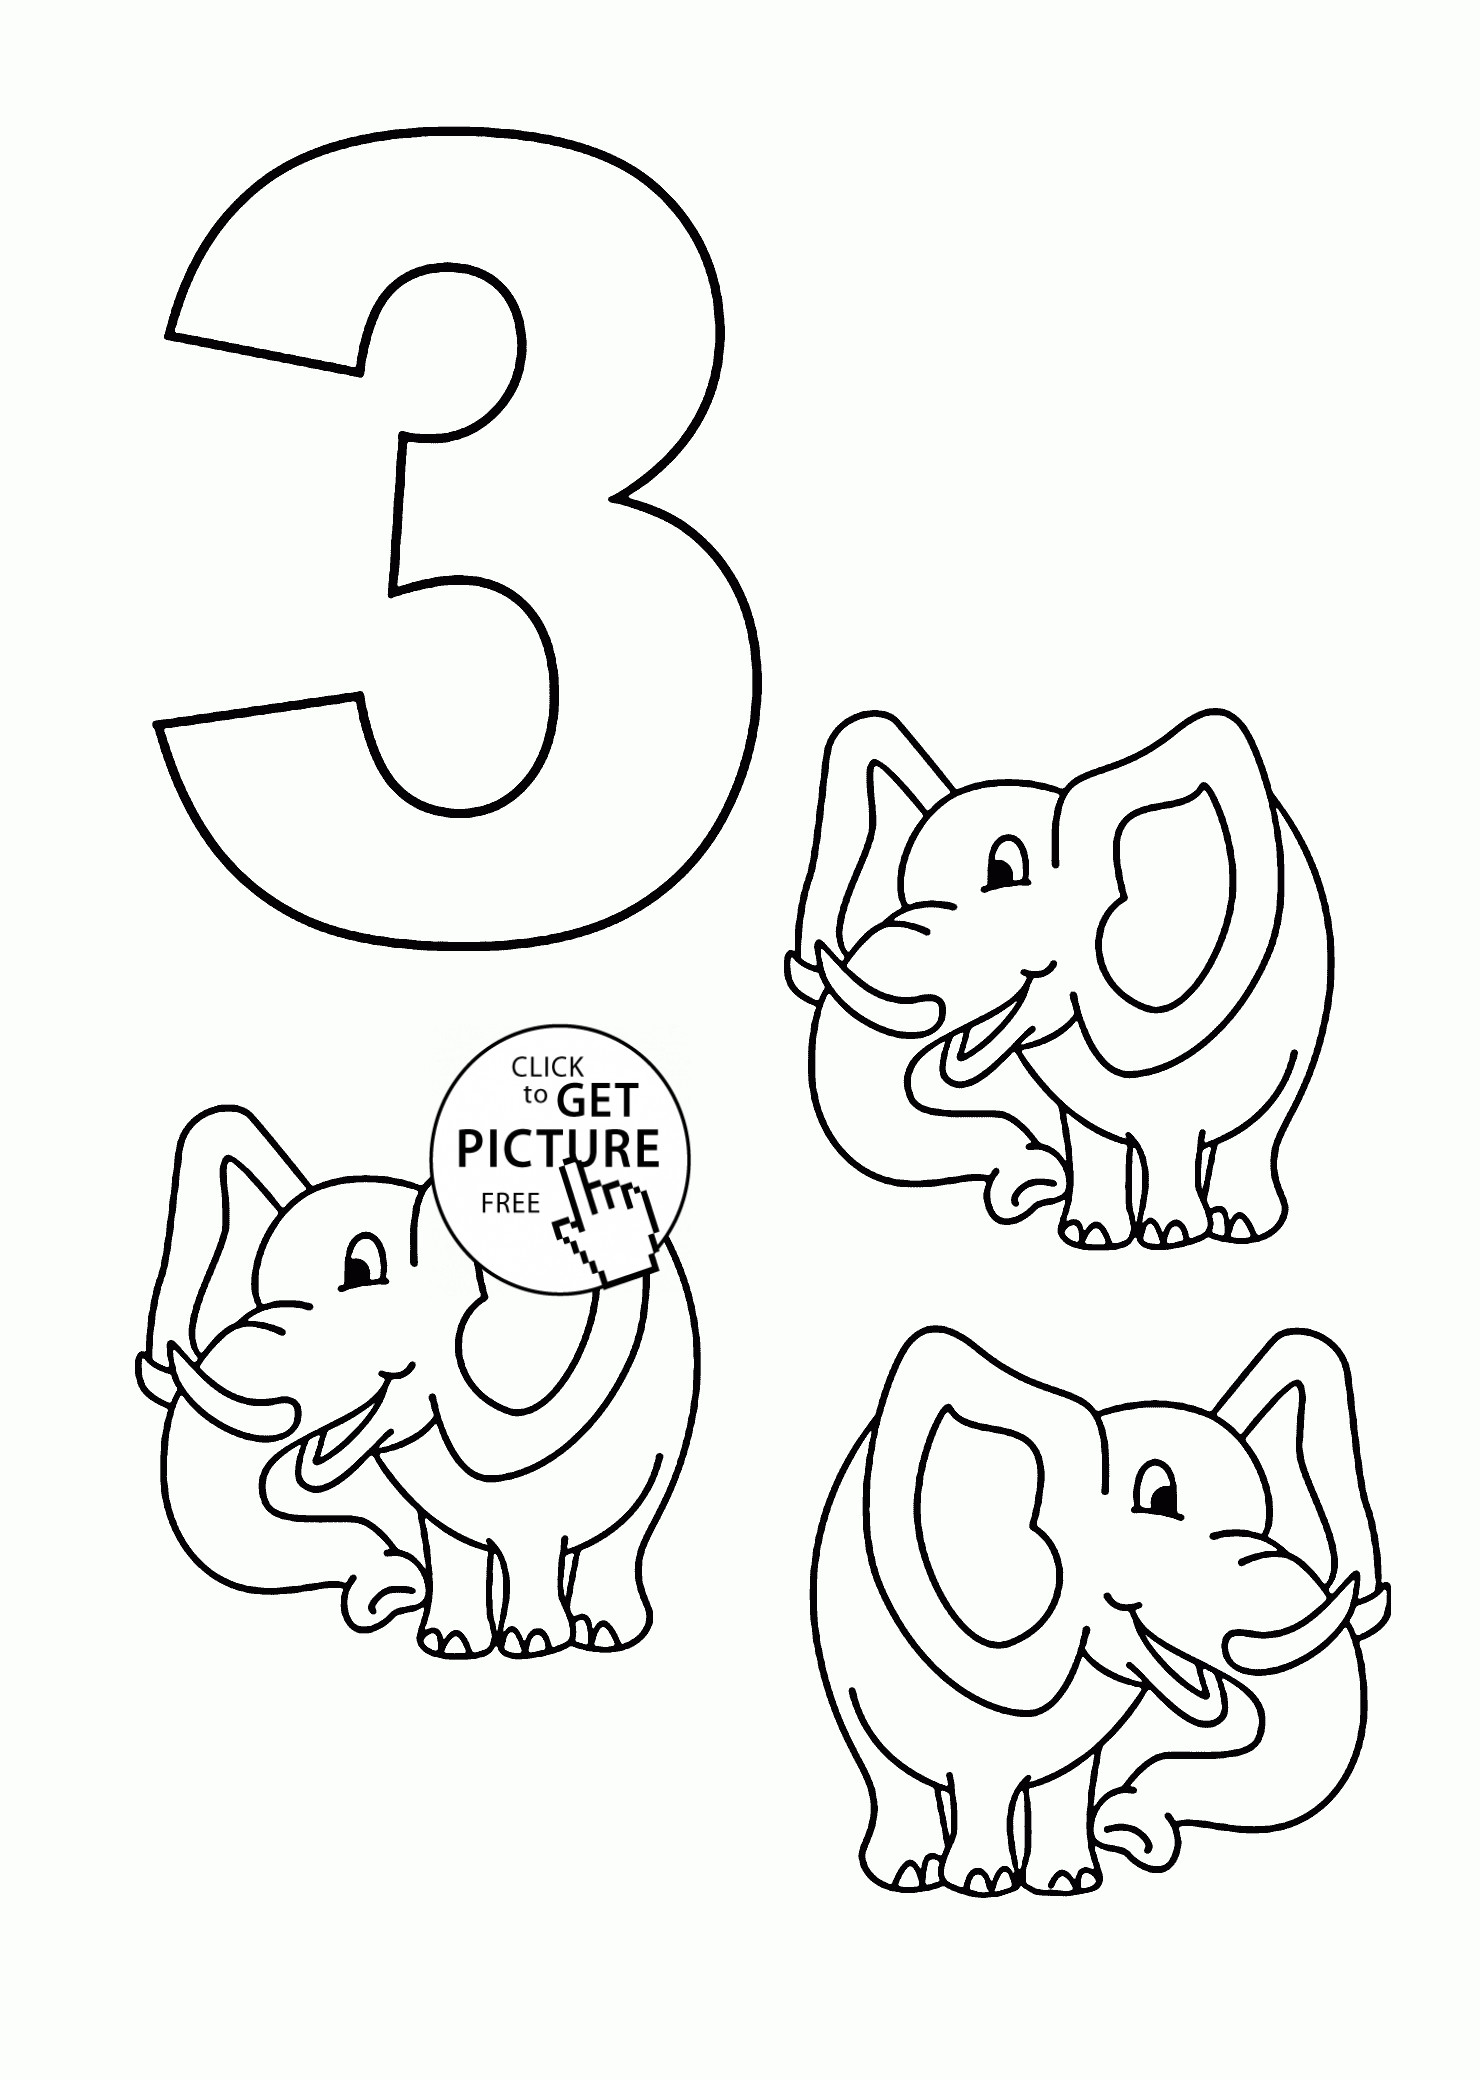 Number Coloring Pages For Toddlers
 Psalm 34 8 Coloring Page Coloring Pages